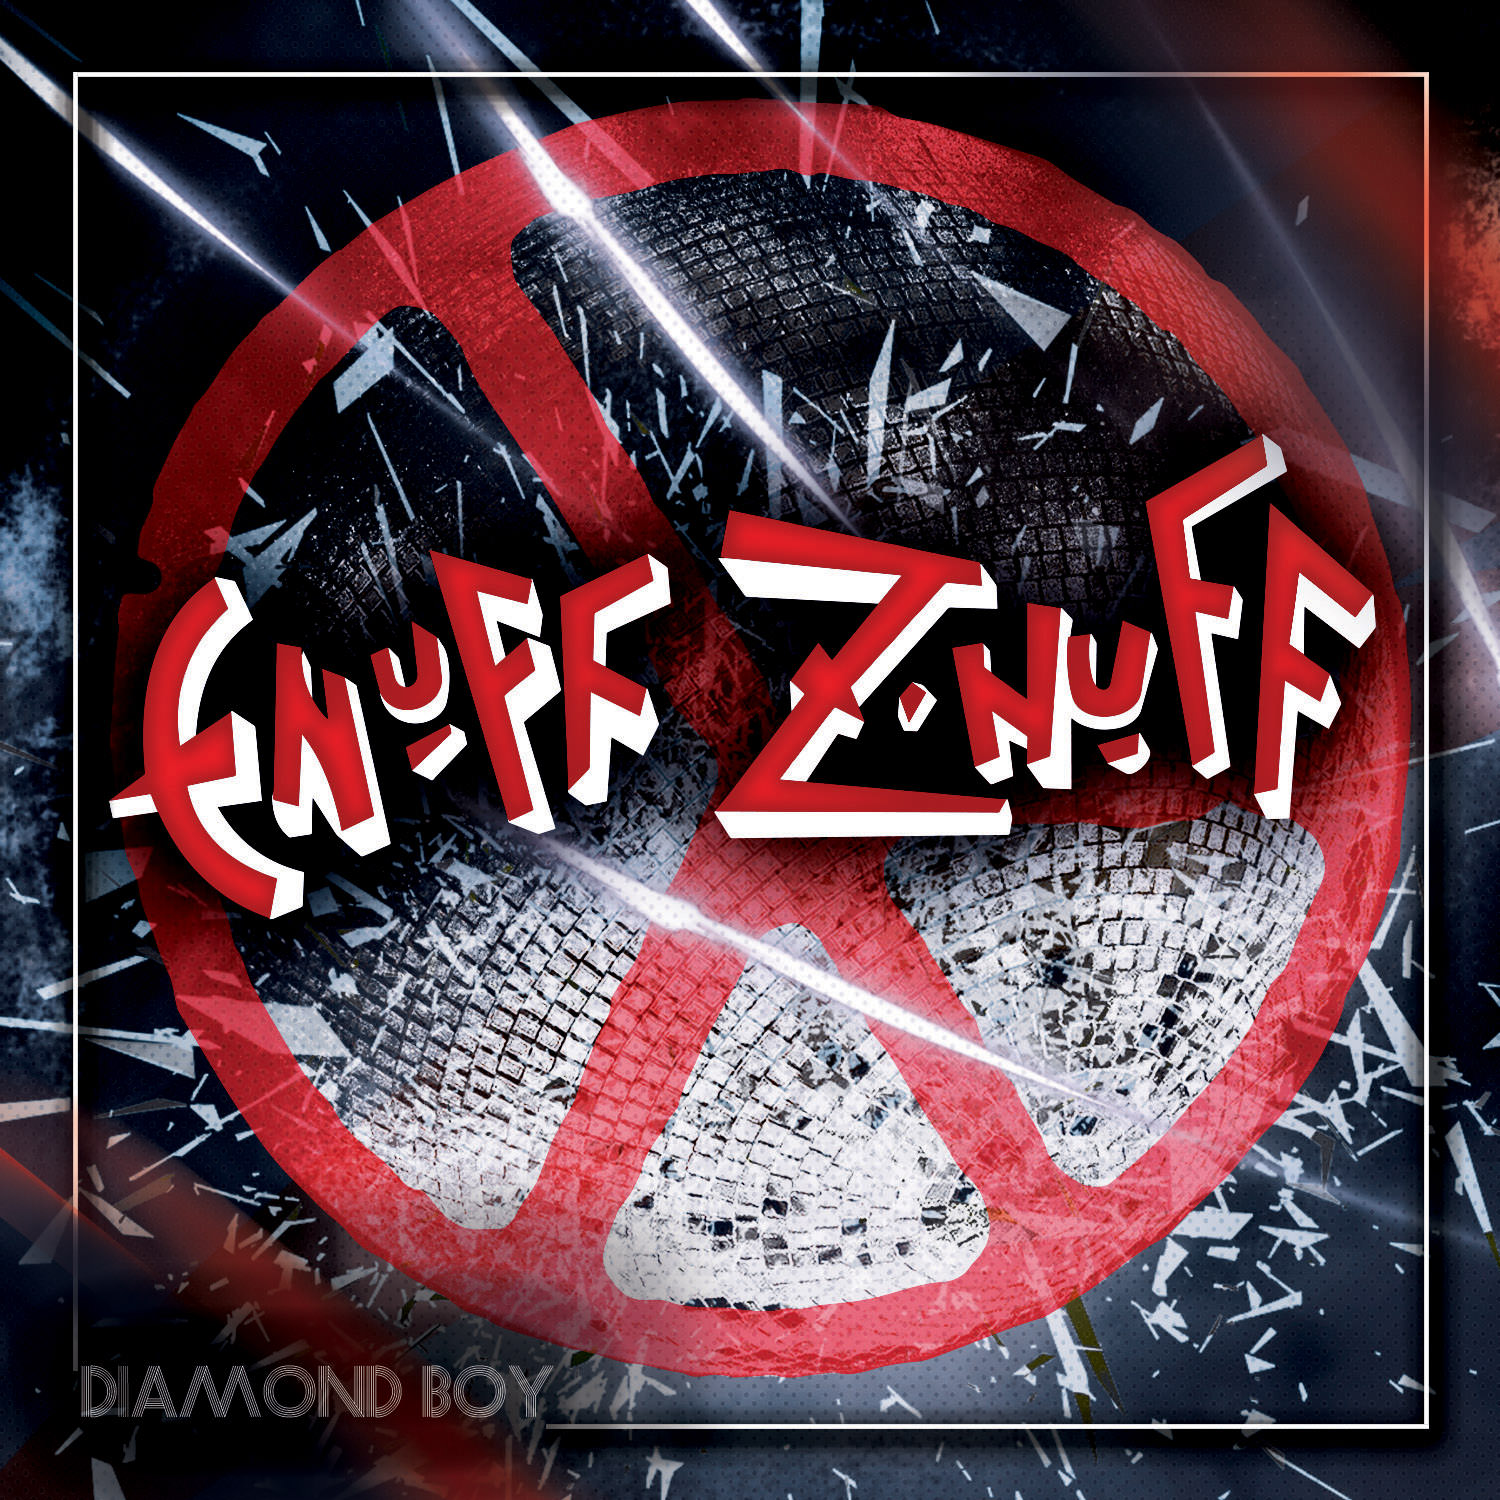 Enuff Z'nuff Streaming New Track "Where Did You Go"